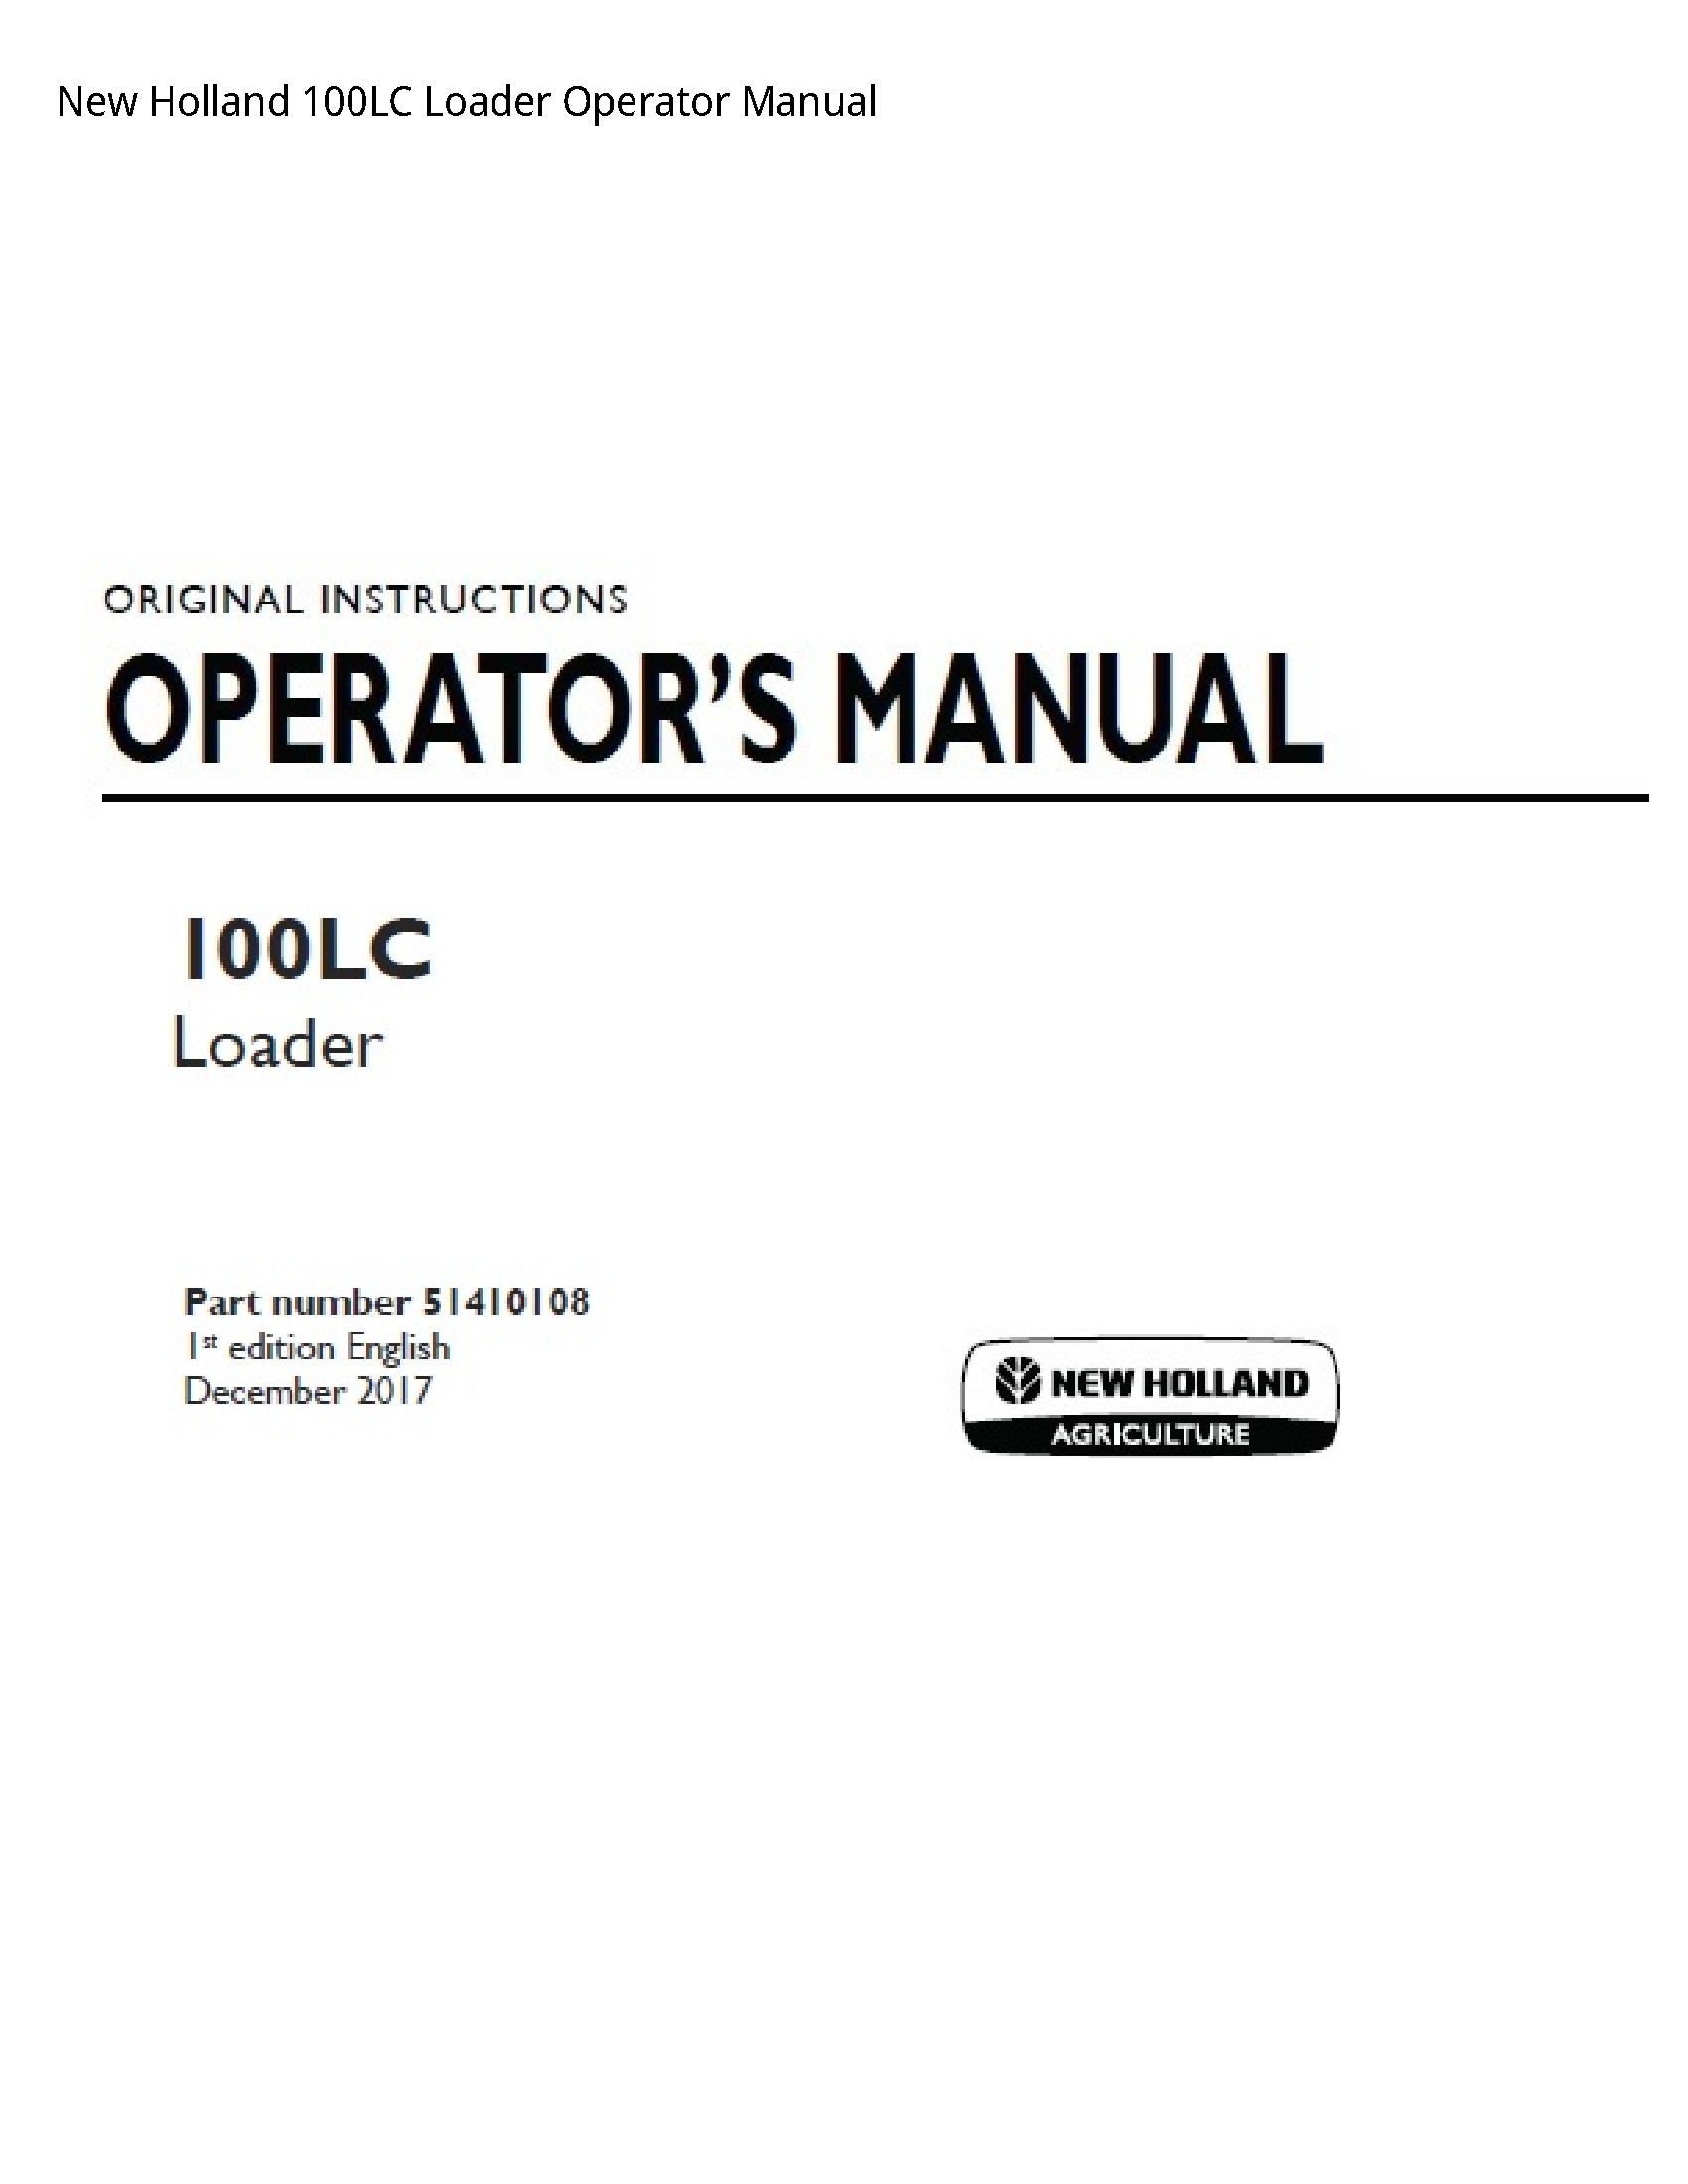 New Holland 100LC Loader Operator manual